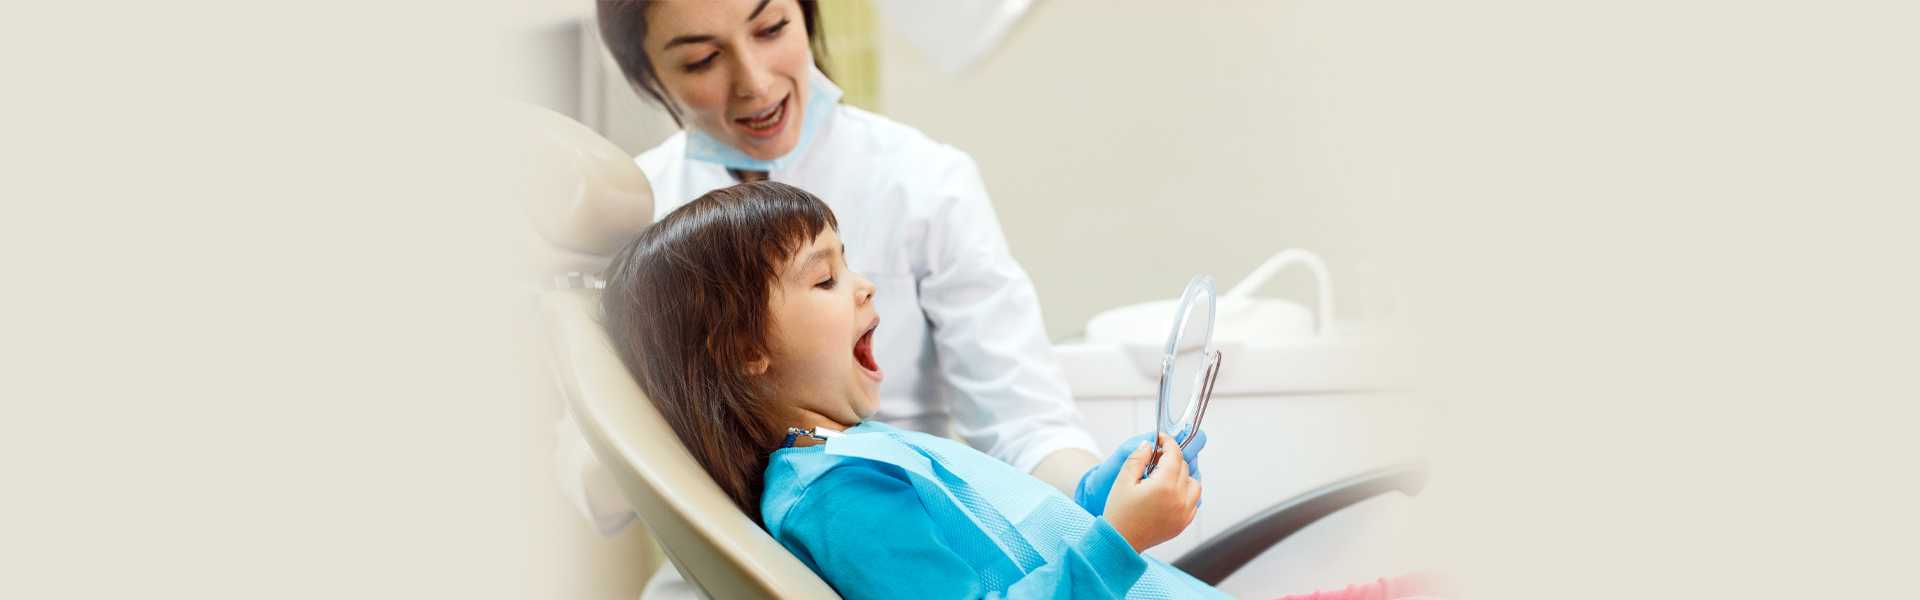 What Dental Services Do Pediatric Dentists Provide?